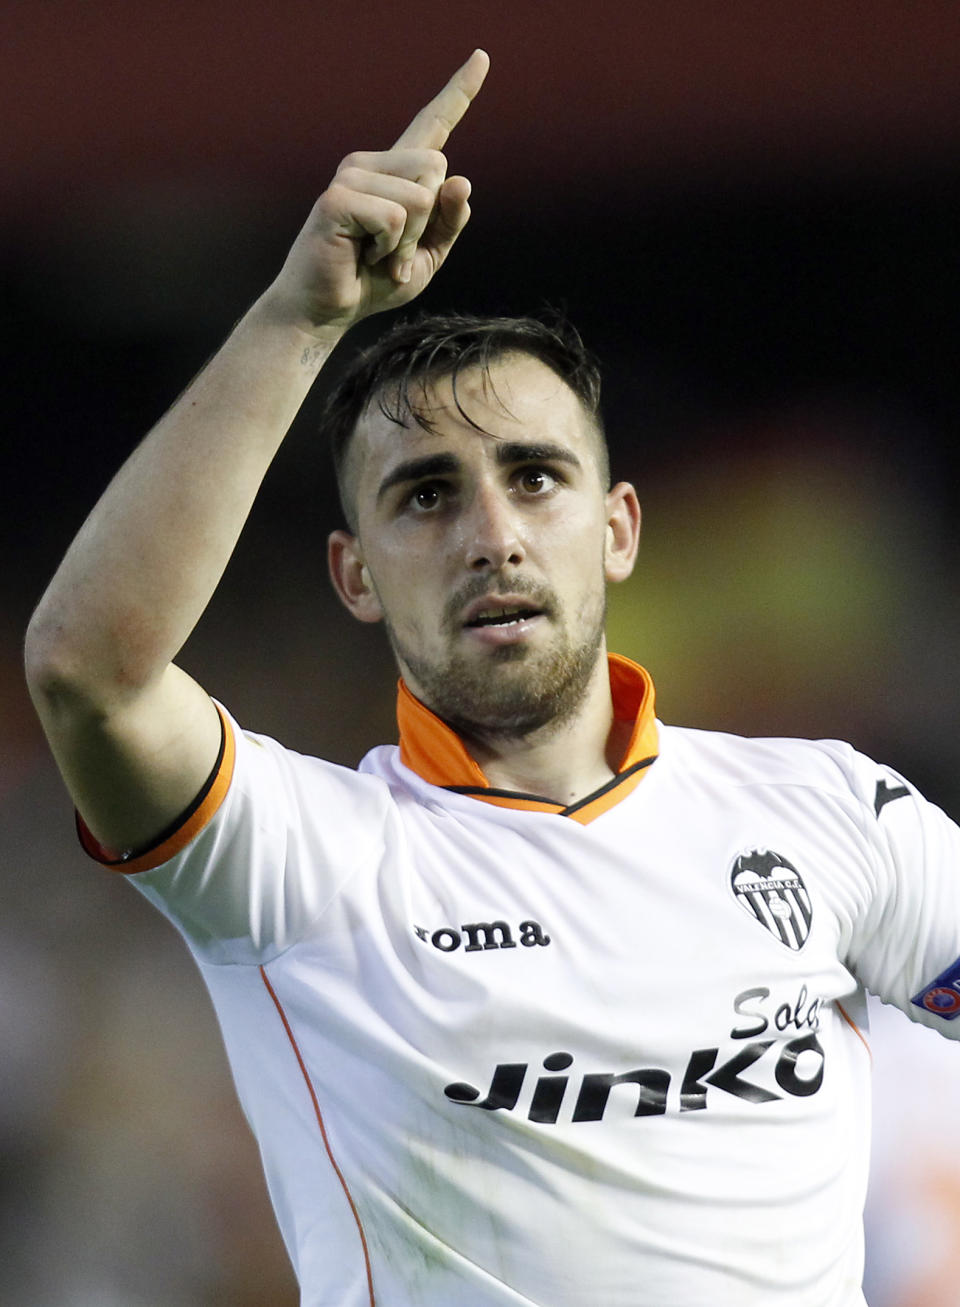 Valencia’s Paco Alcacer celebrates after scoring against Basel during the Europa League quarterfinal, second leg soccer match at the Mestalla stadium in Valencia, Spain, on Thursday, April 10, 2014. Valencia lost 3-0 in the first leg at Basel. (AP Photo/Alberto Saiz)